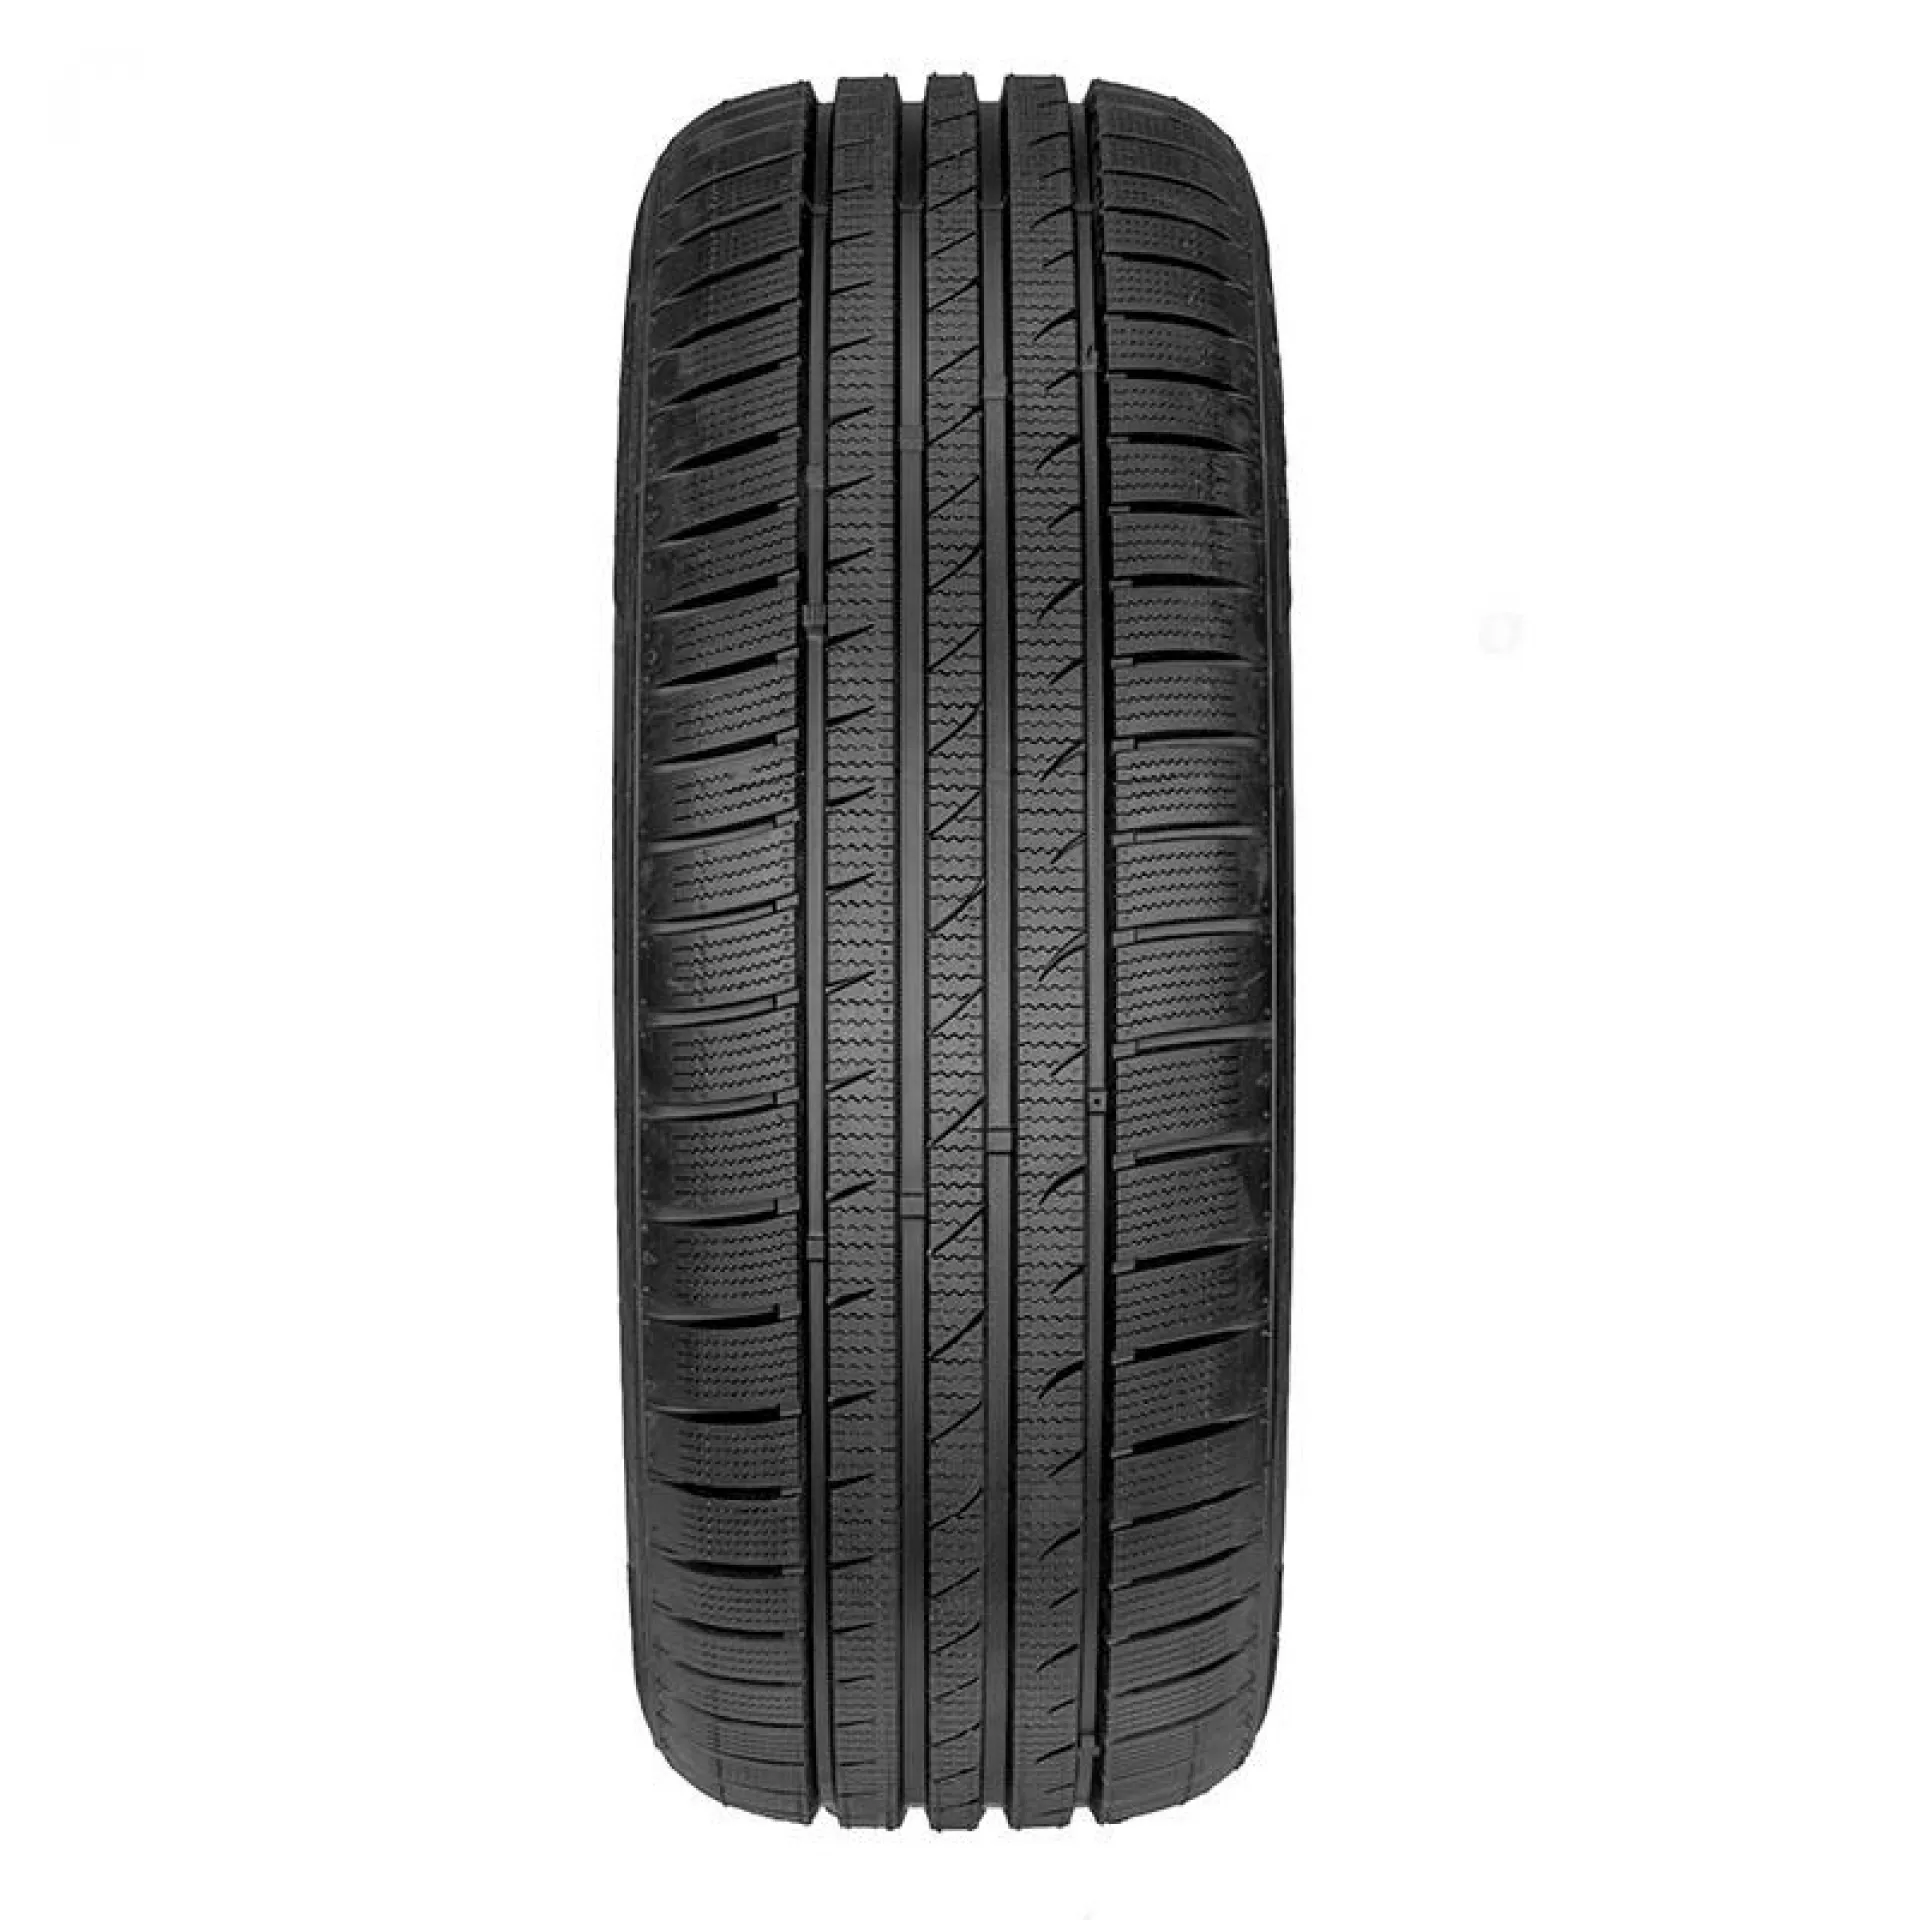 Fortuna Gowin UHP2 245/40R19 98V XL